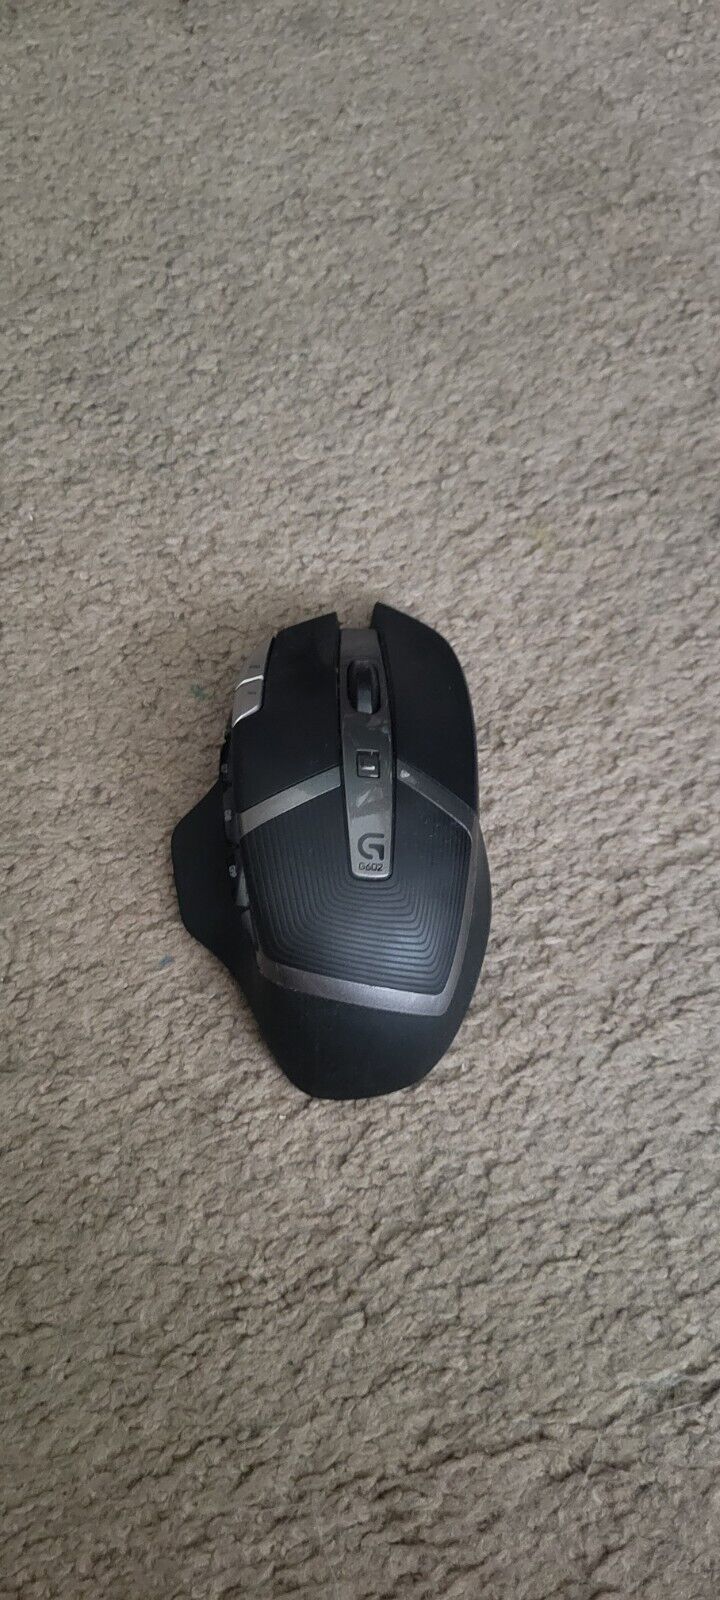 Logitech G602 Gaming Wireless Mouse - (500 MHz USB RECEIVER NOT INCLUDED).